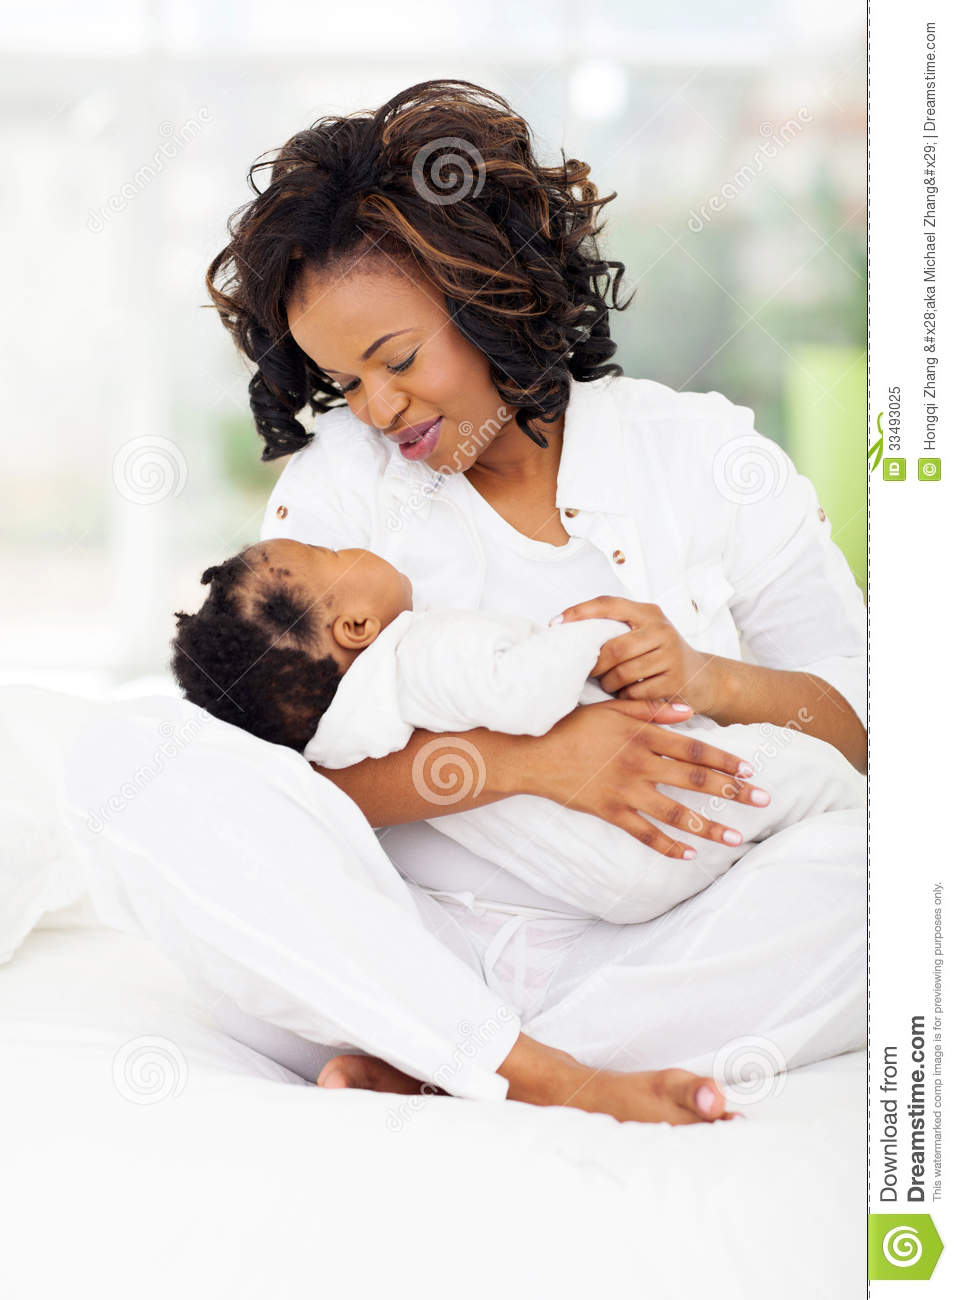 African Mother Holding Baby Royalty Free Stock Photo   Image  33493025